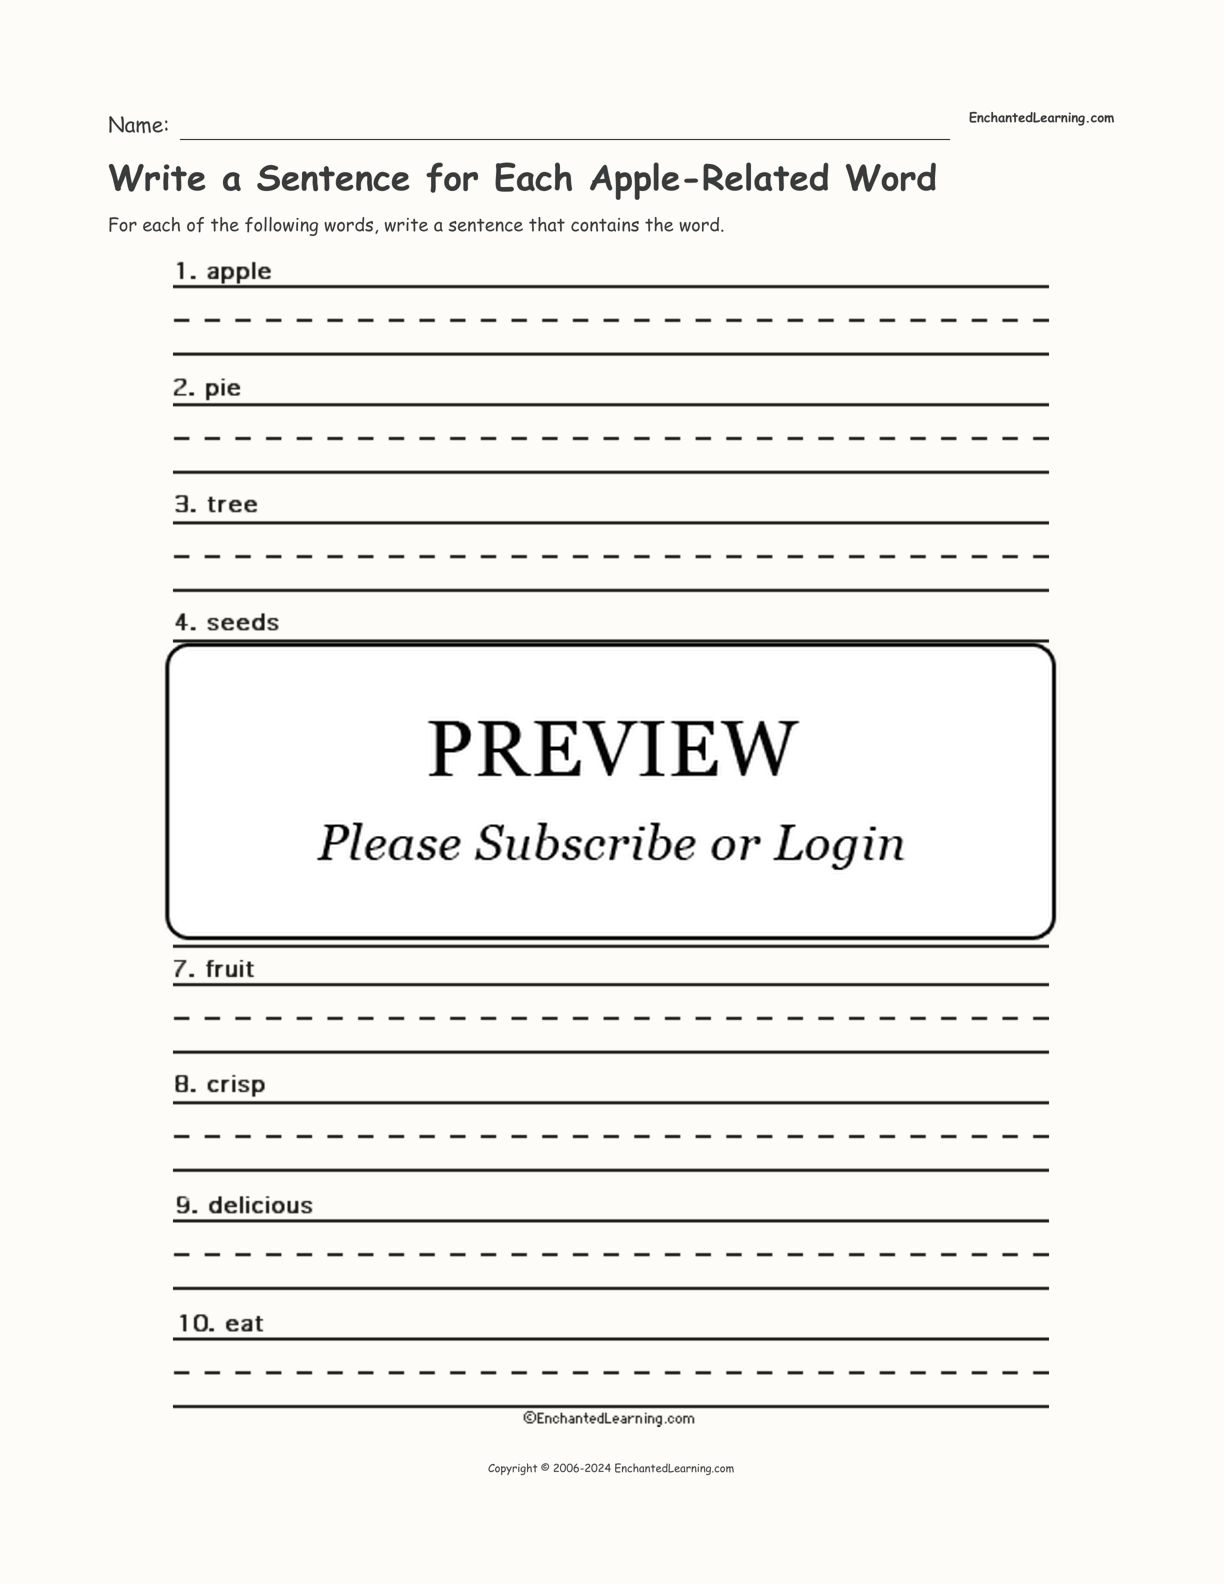 Write a Sentence for Each Apple-Related Word interactive worksheet page 1